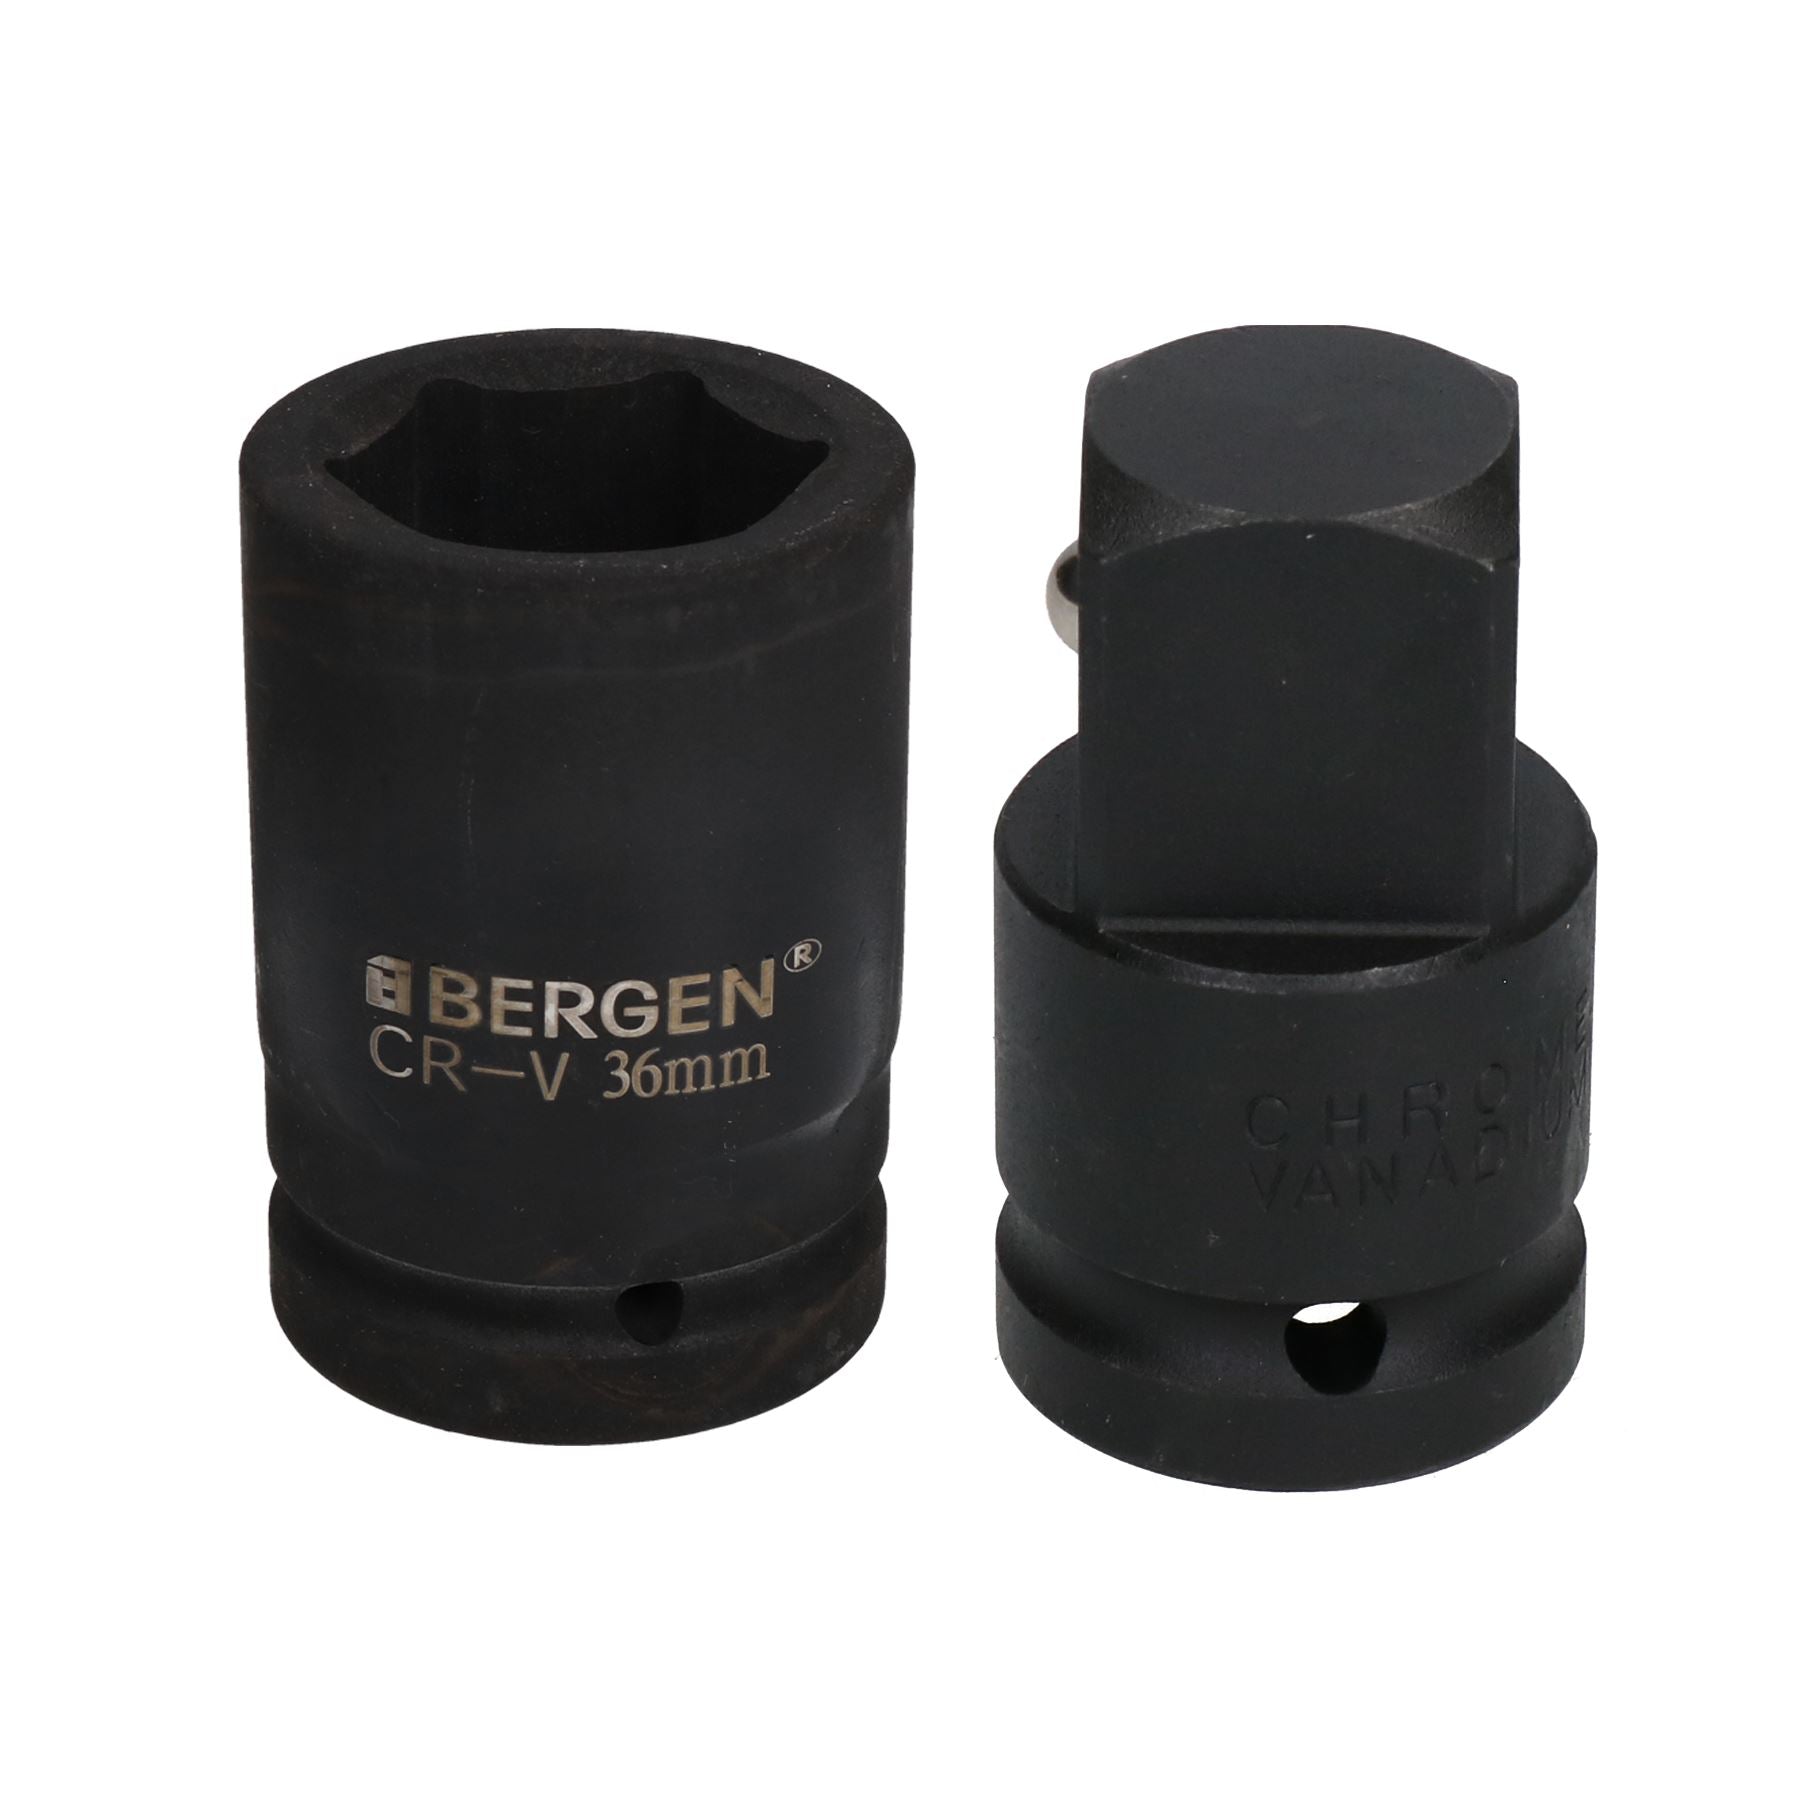 36mm Metric 3/4" or 1" Drive Deep Impact Socket 6 Sided With Step Up Adapter